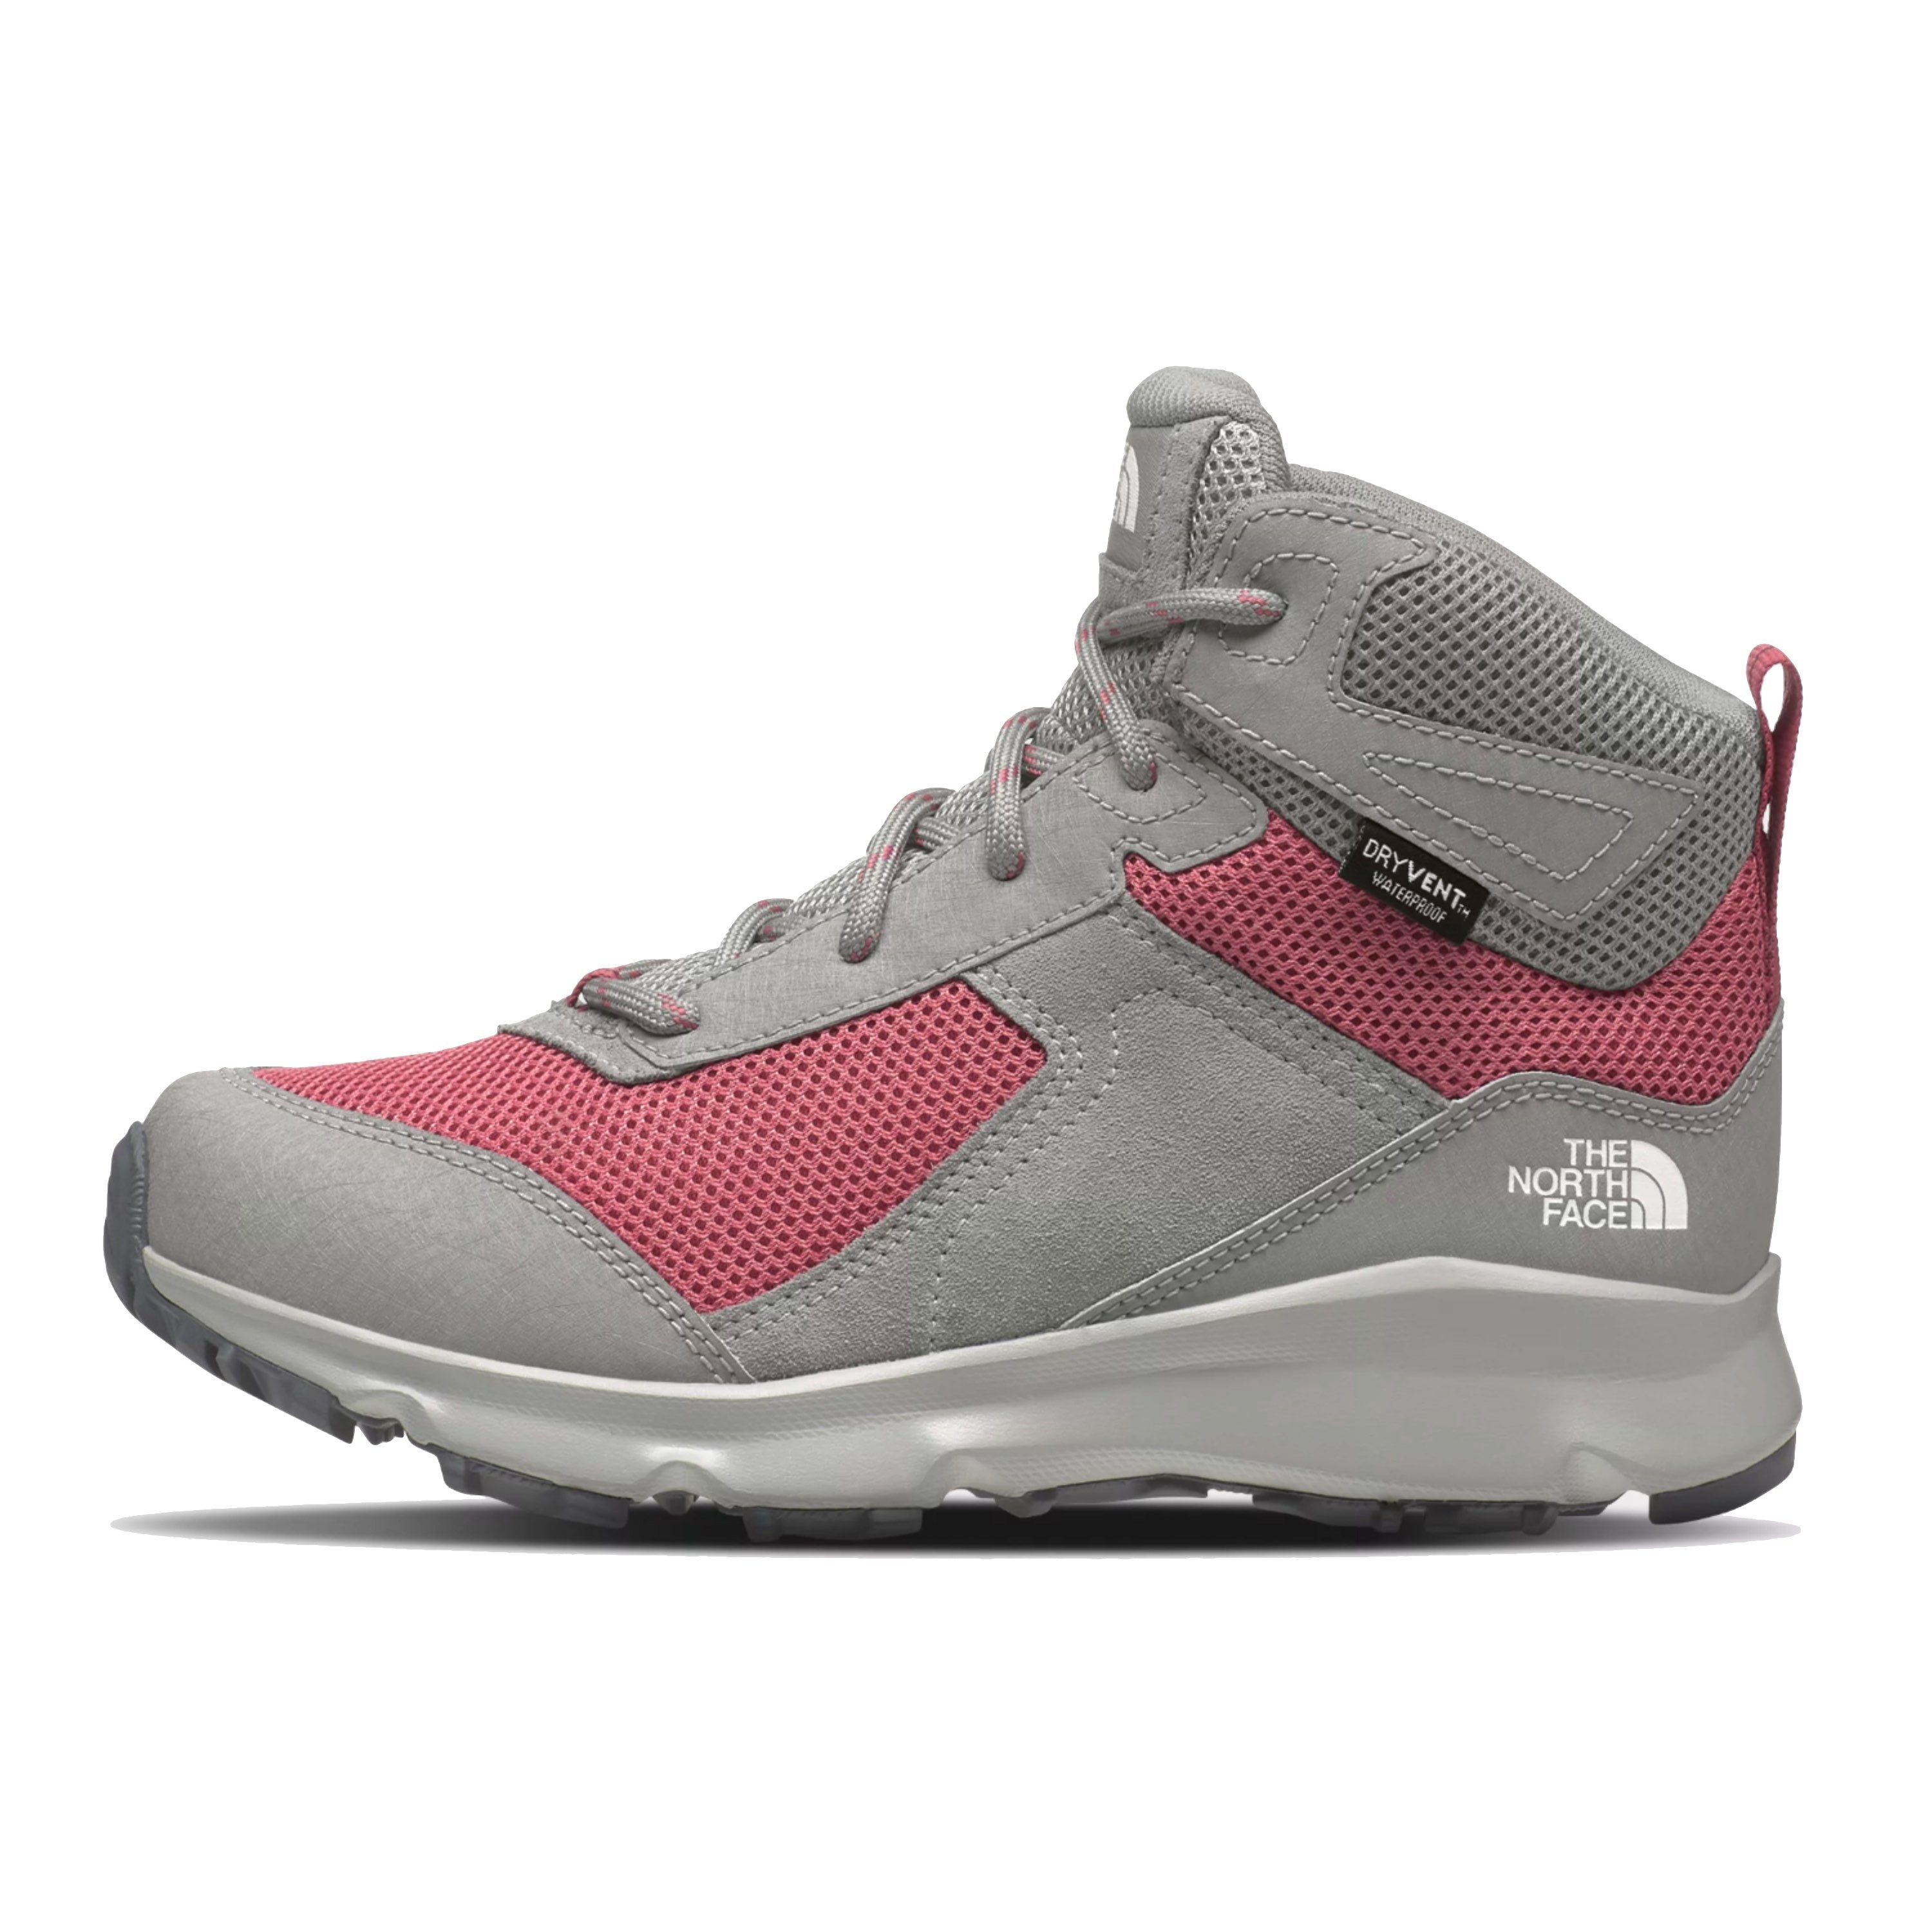 North Face Jr Hedgehog II Mid Waterproof Hiking Shoes - Mountain Kids Outfitters: Meld Grey / Slate Rose Color - White Background side view